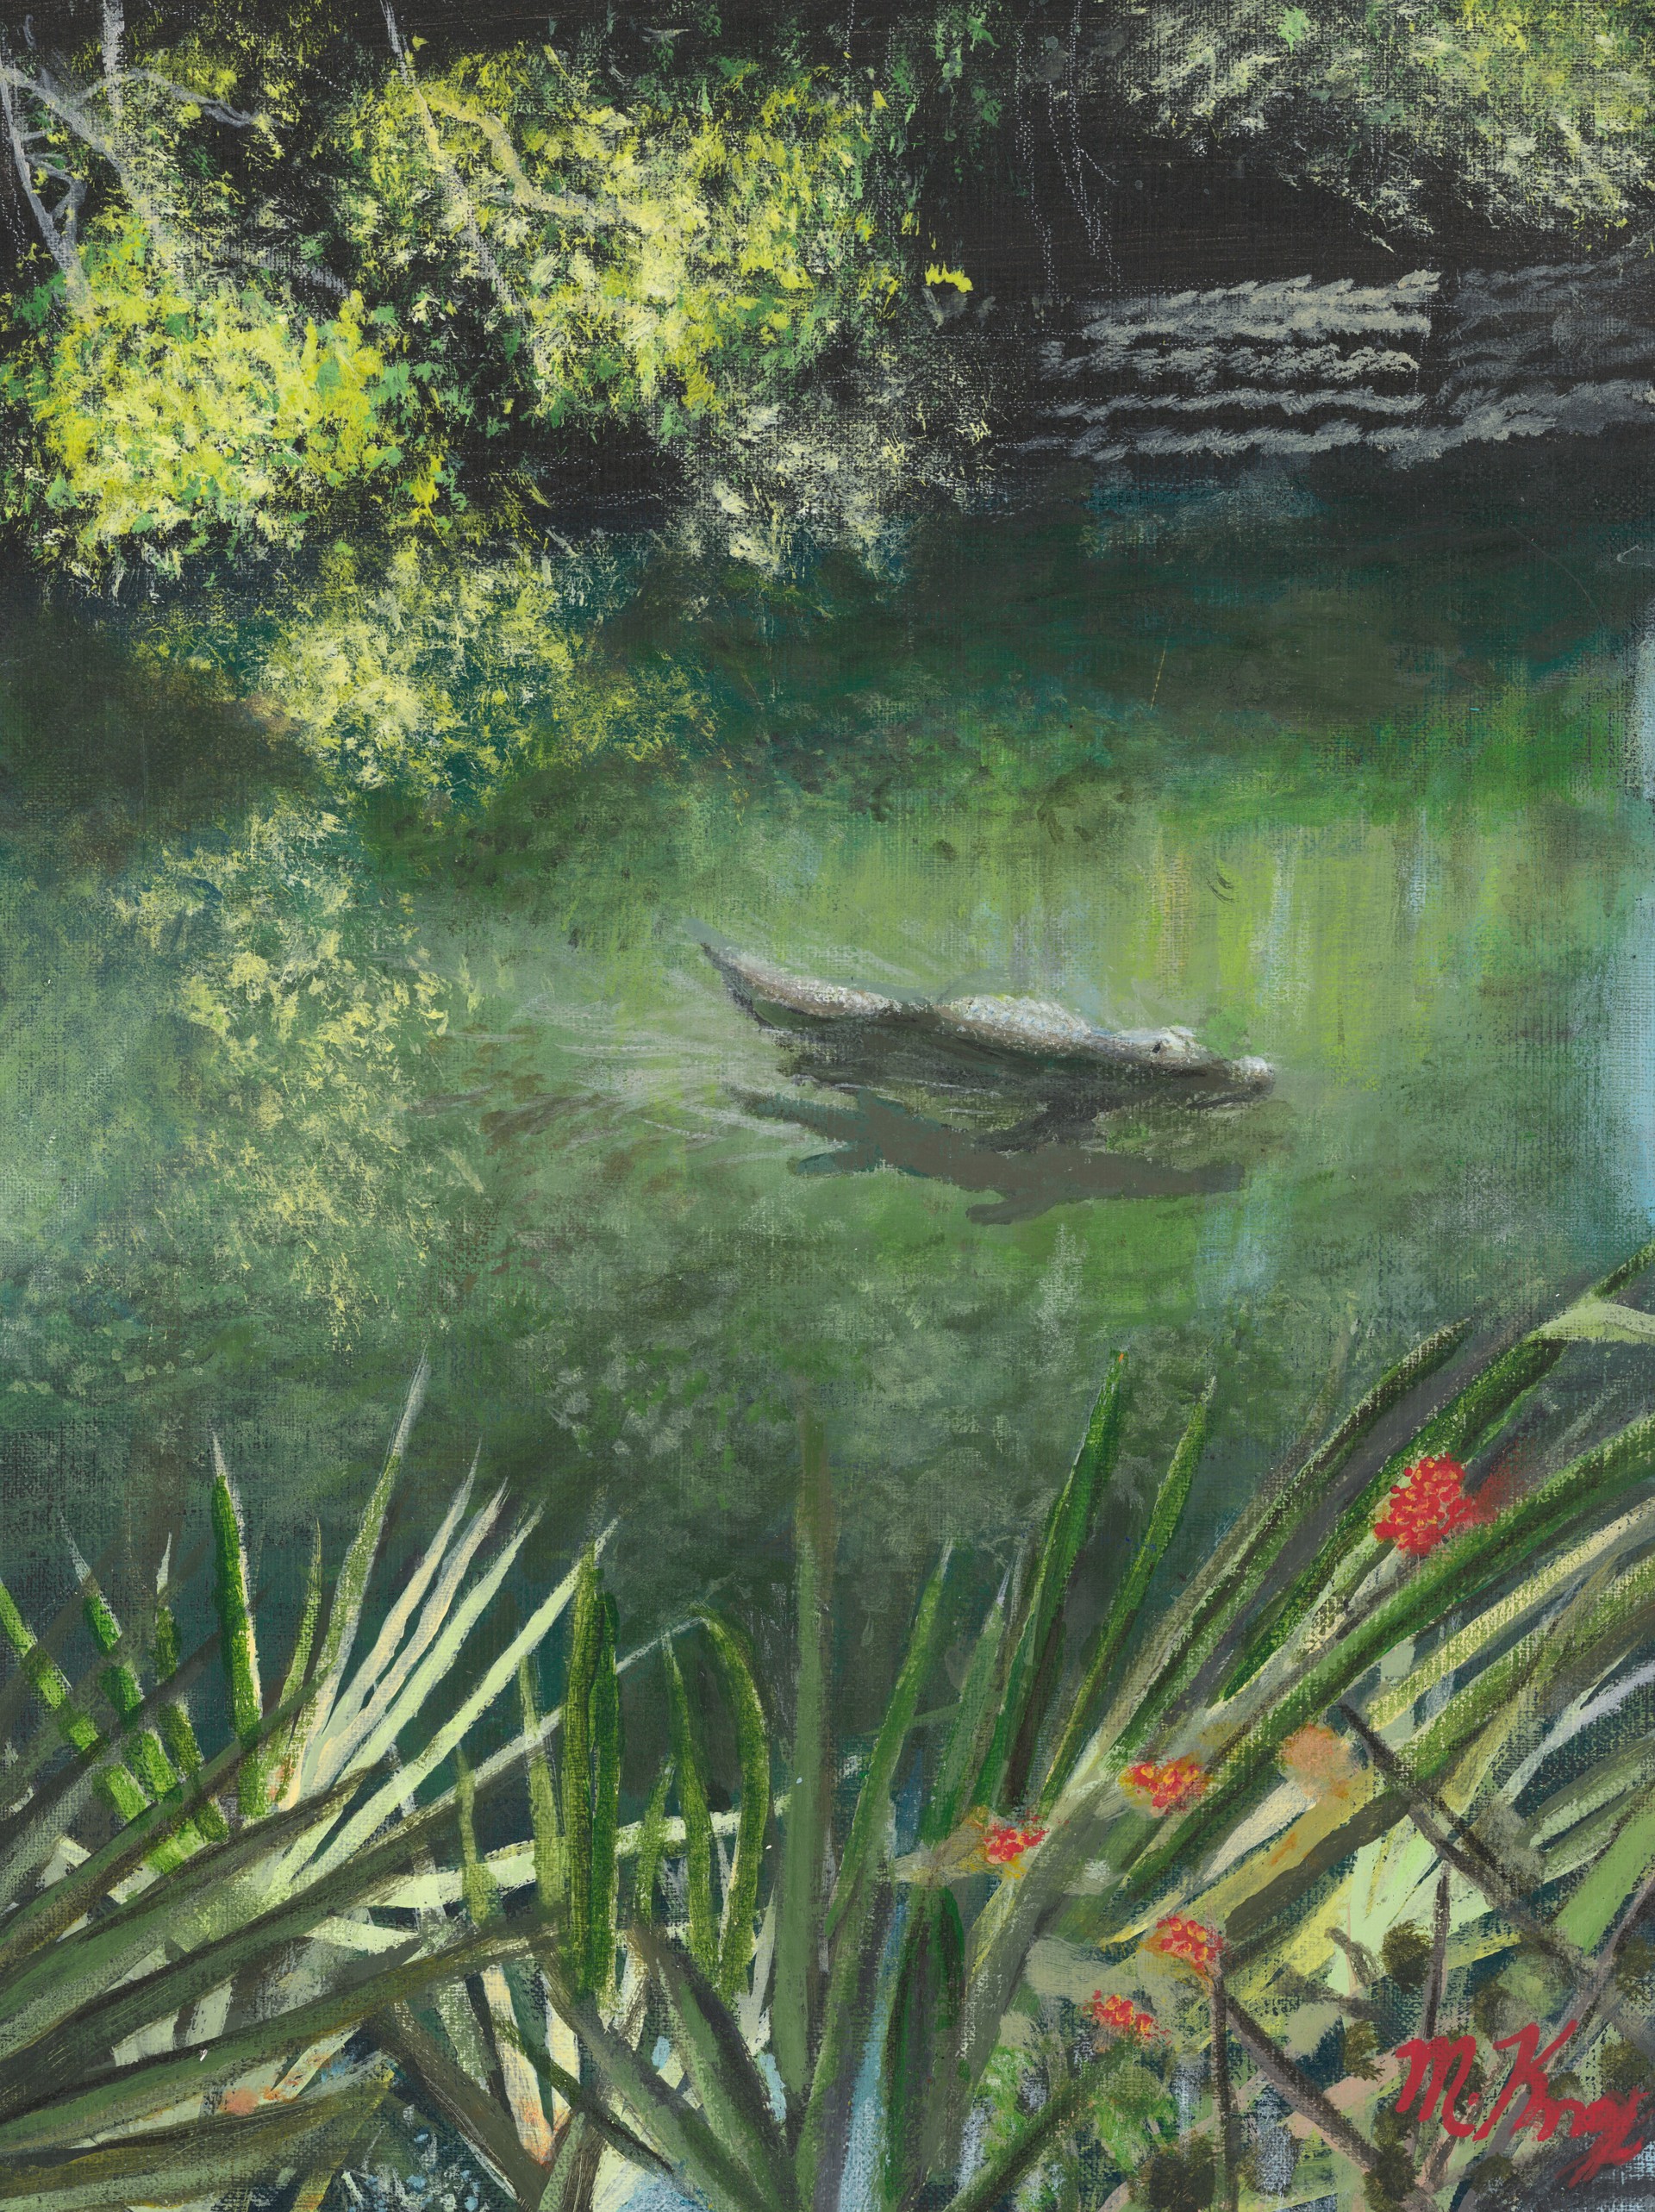 Gator in the Everglades by Mike Knox